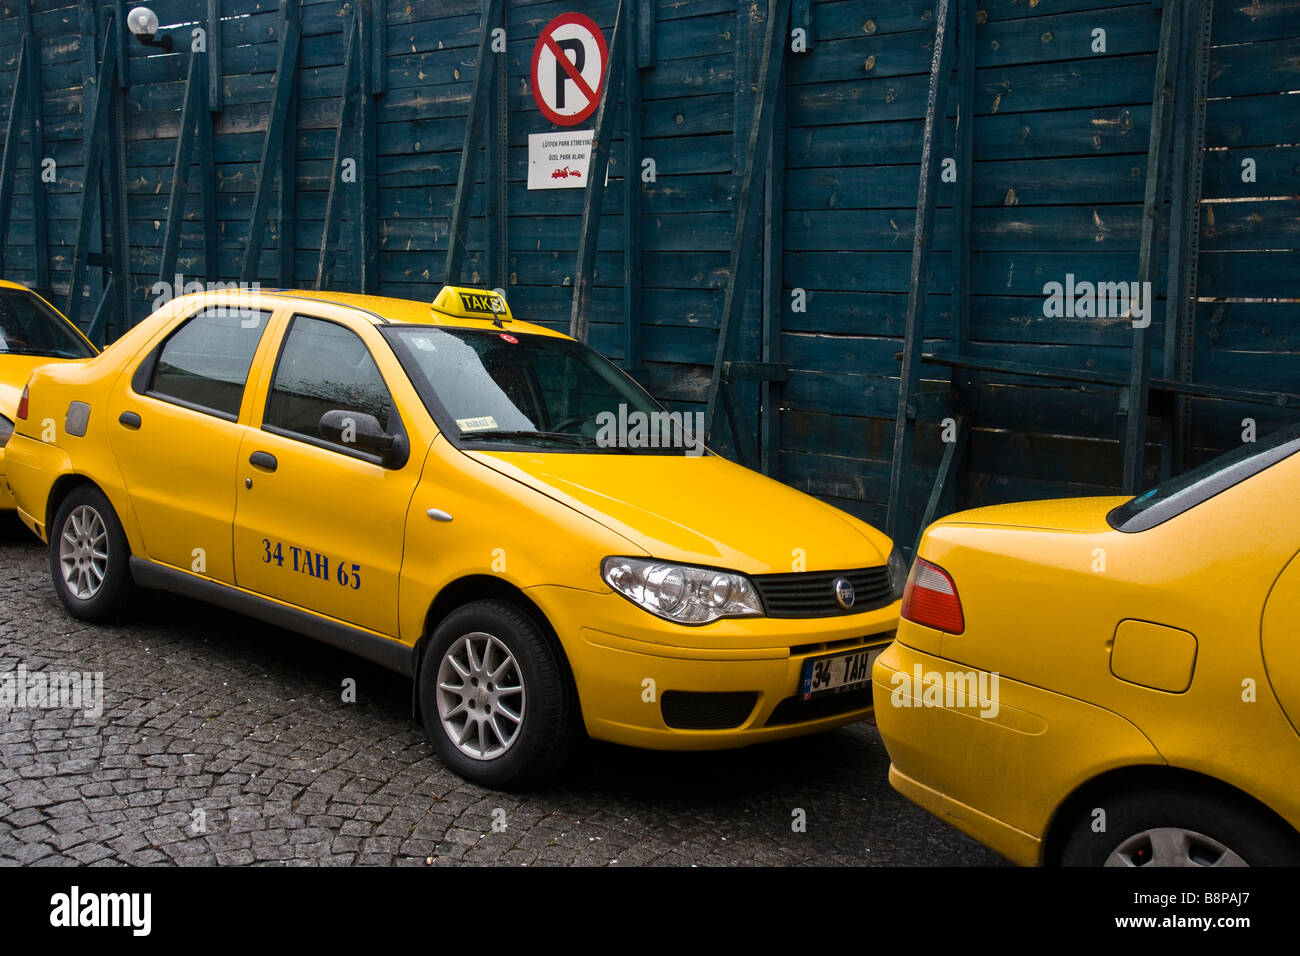 Taxis parked in Istanbul Stock Photo